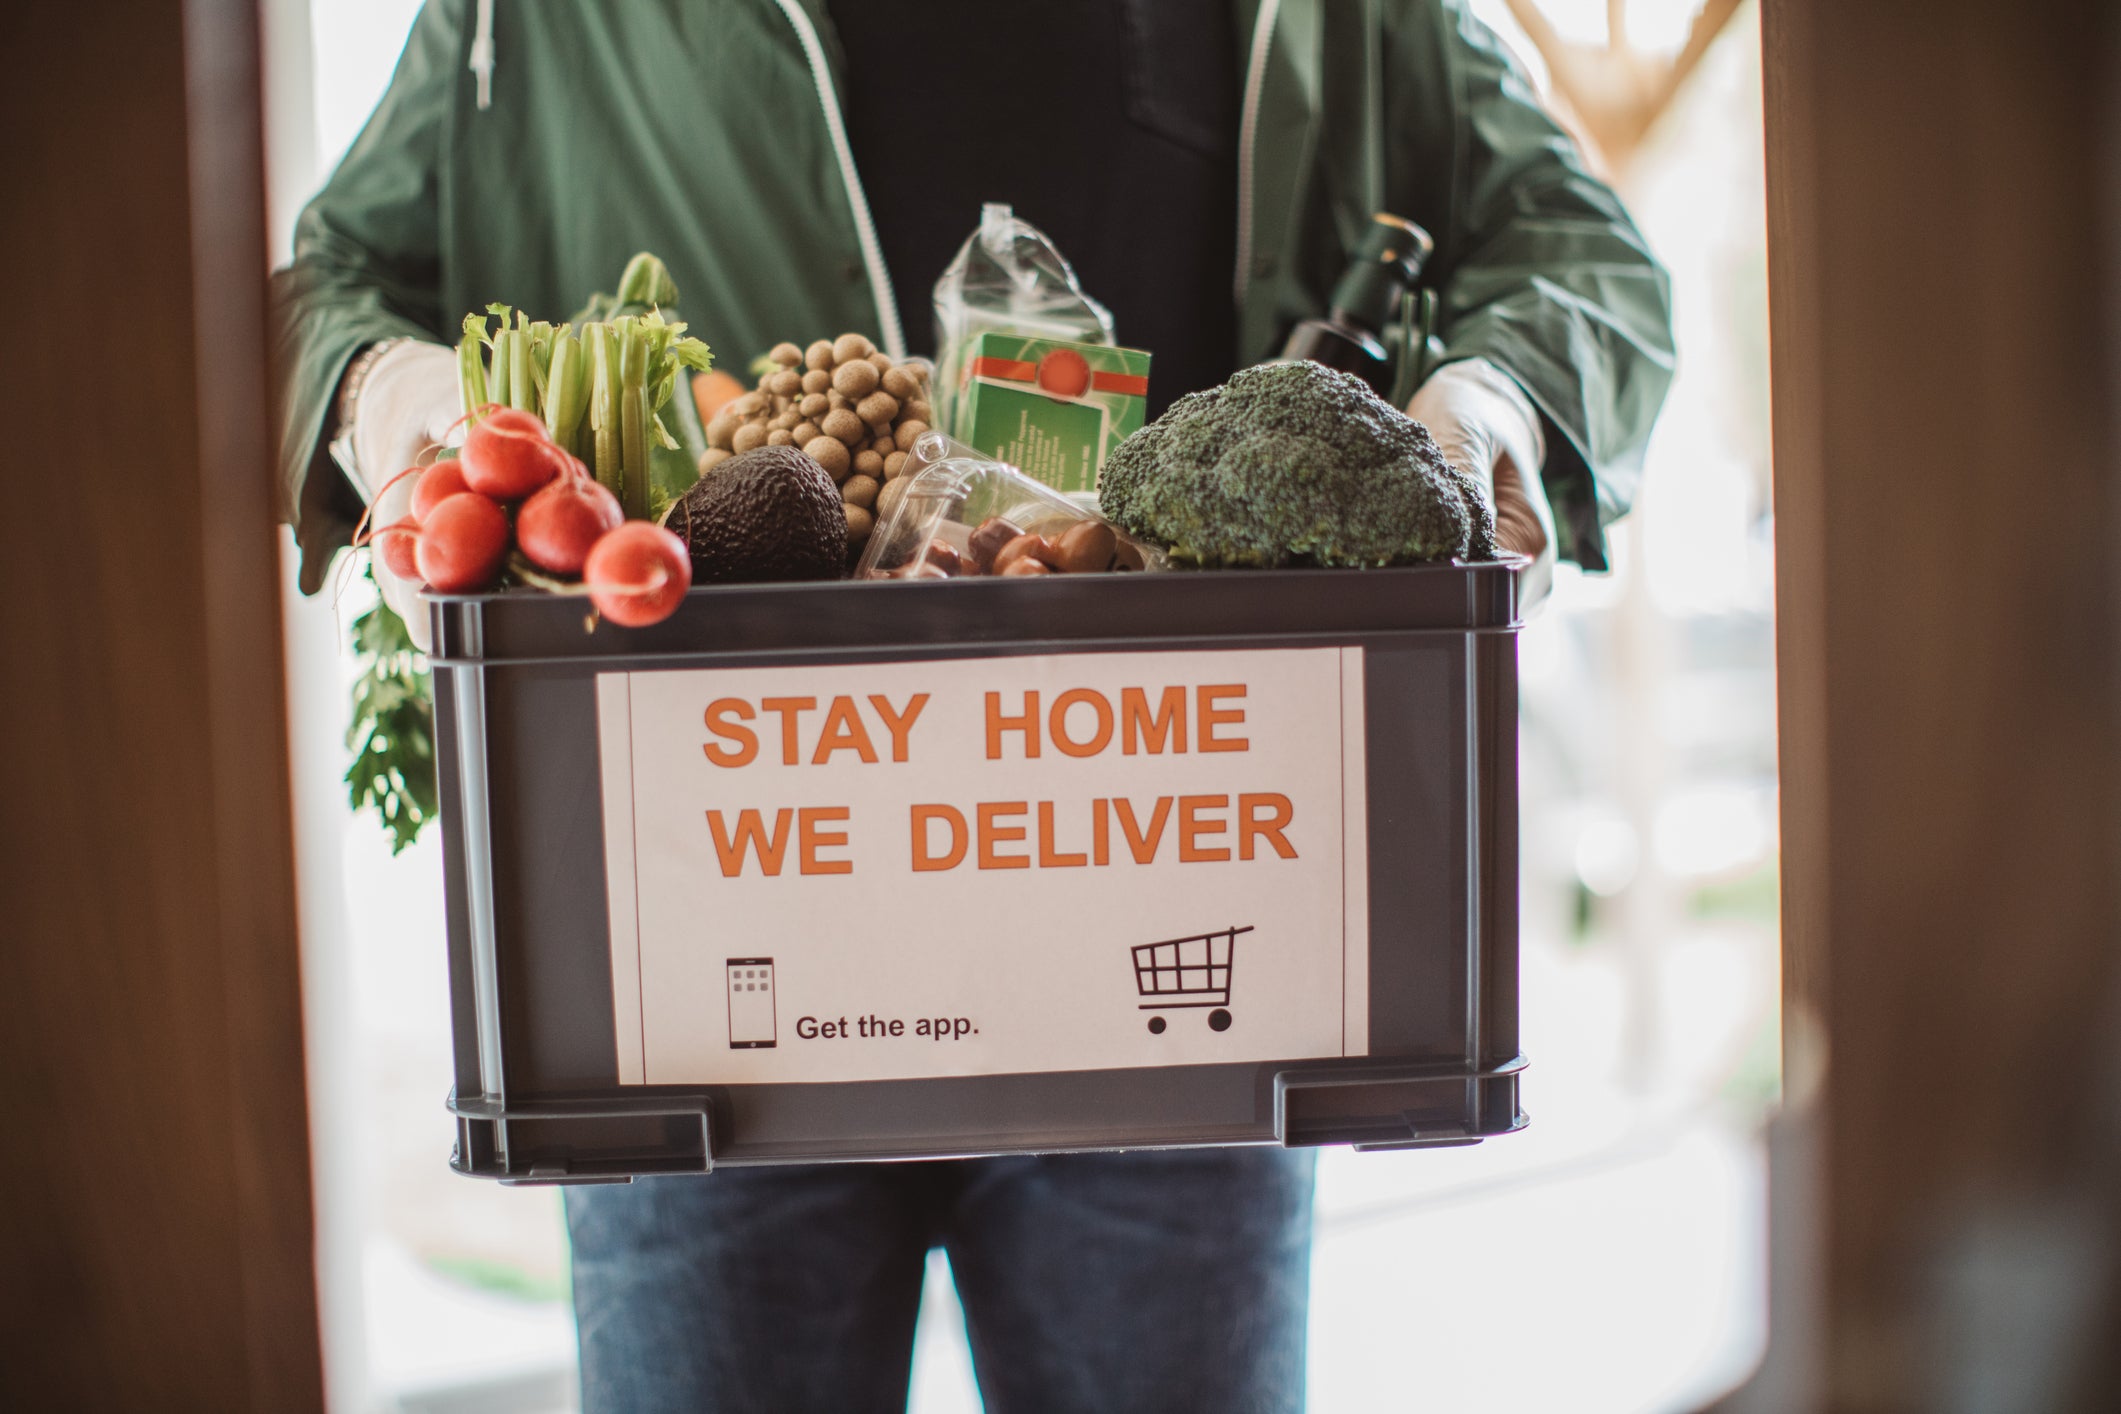 Delivering food ordered online while in home isolation during quarantine. Stay home we deliver sign on box.